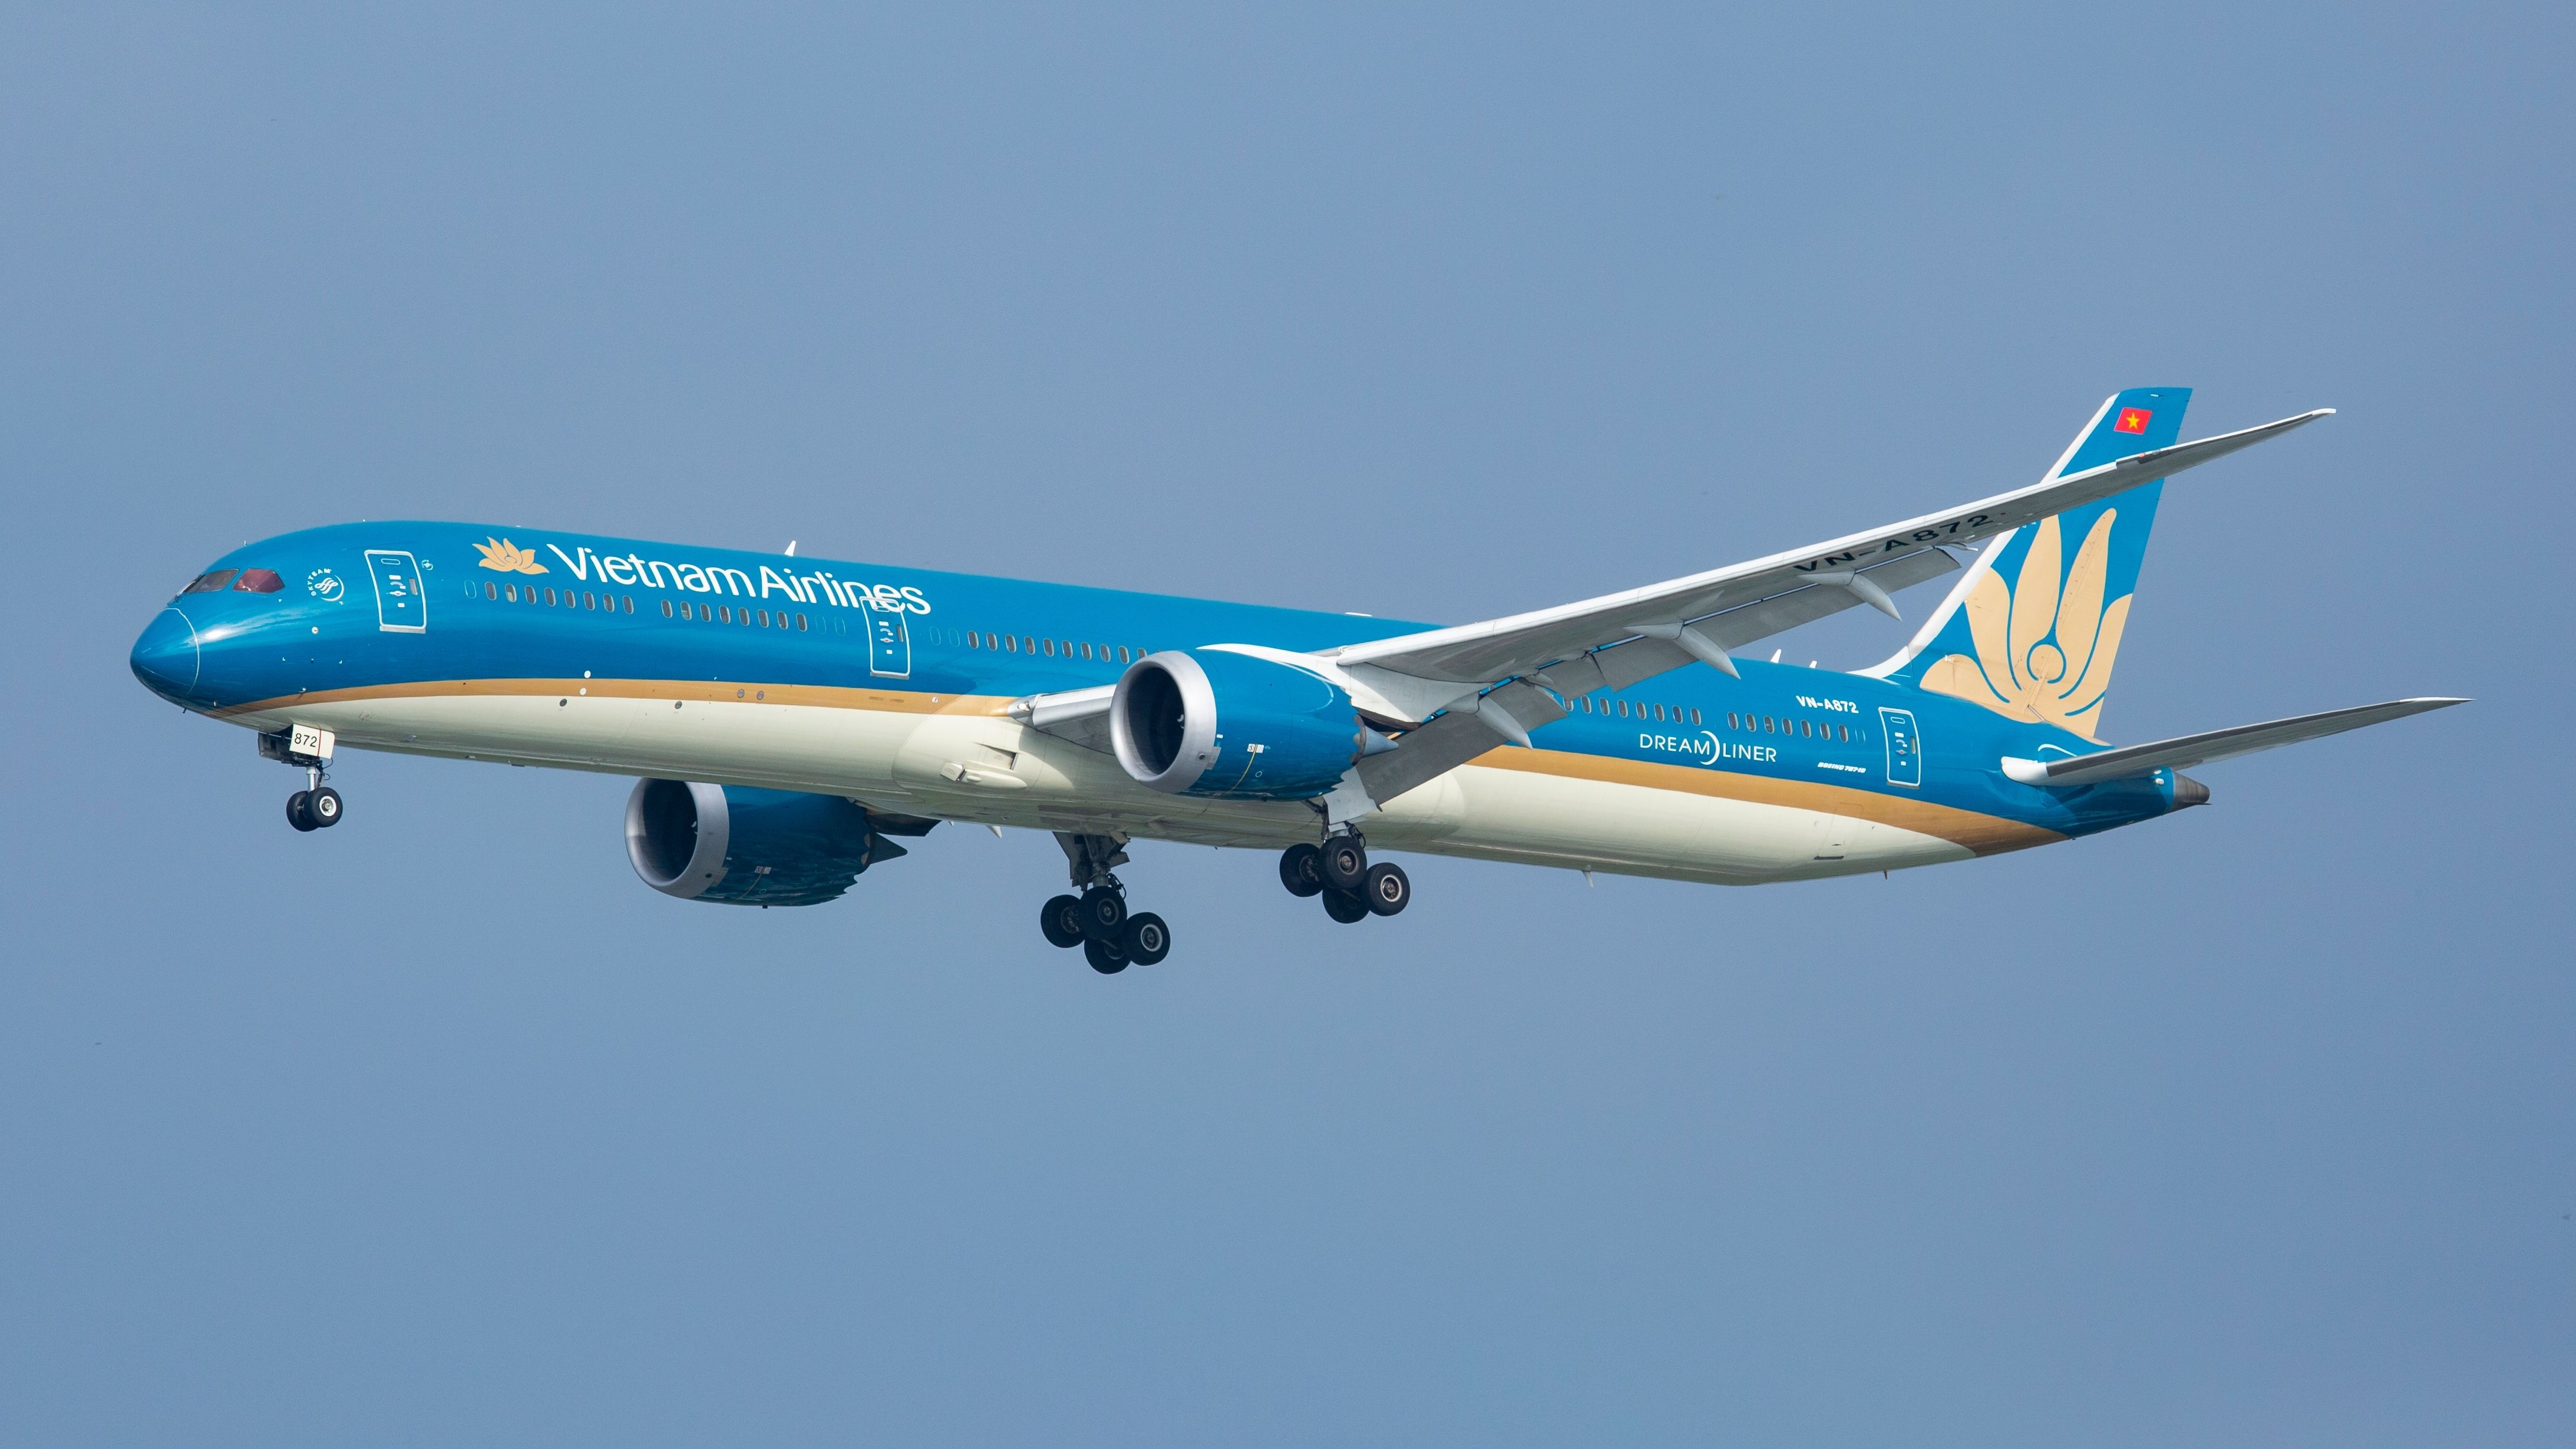 A Vietnam Airlines Boeing 787-10 flying in the sky.